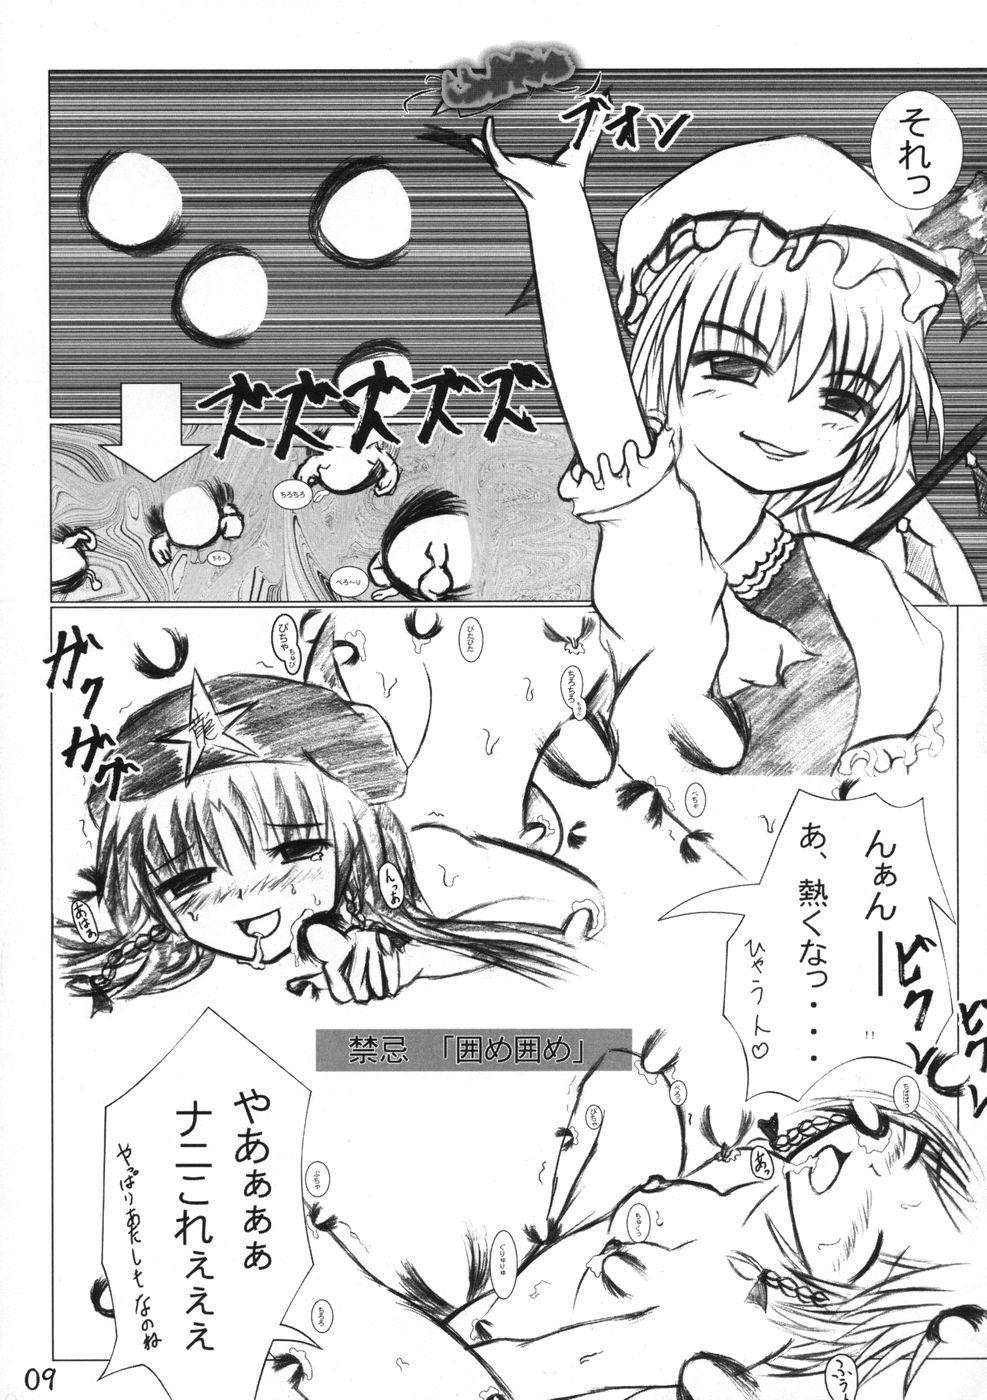 Flagra 業創りし風 - Touhou project Lolicon - Page 9